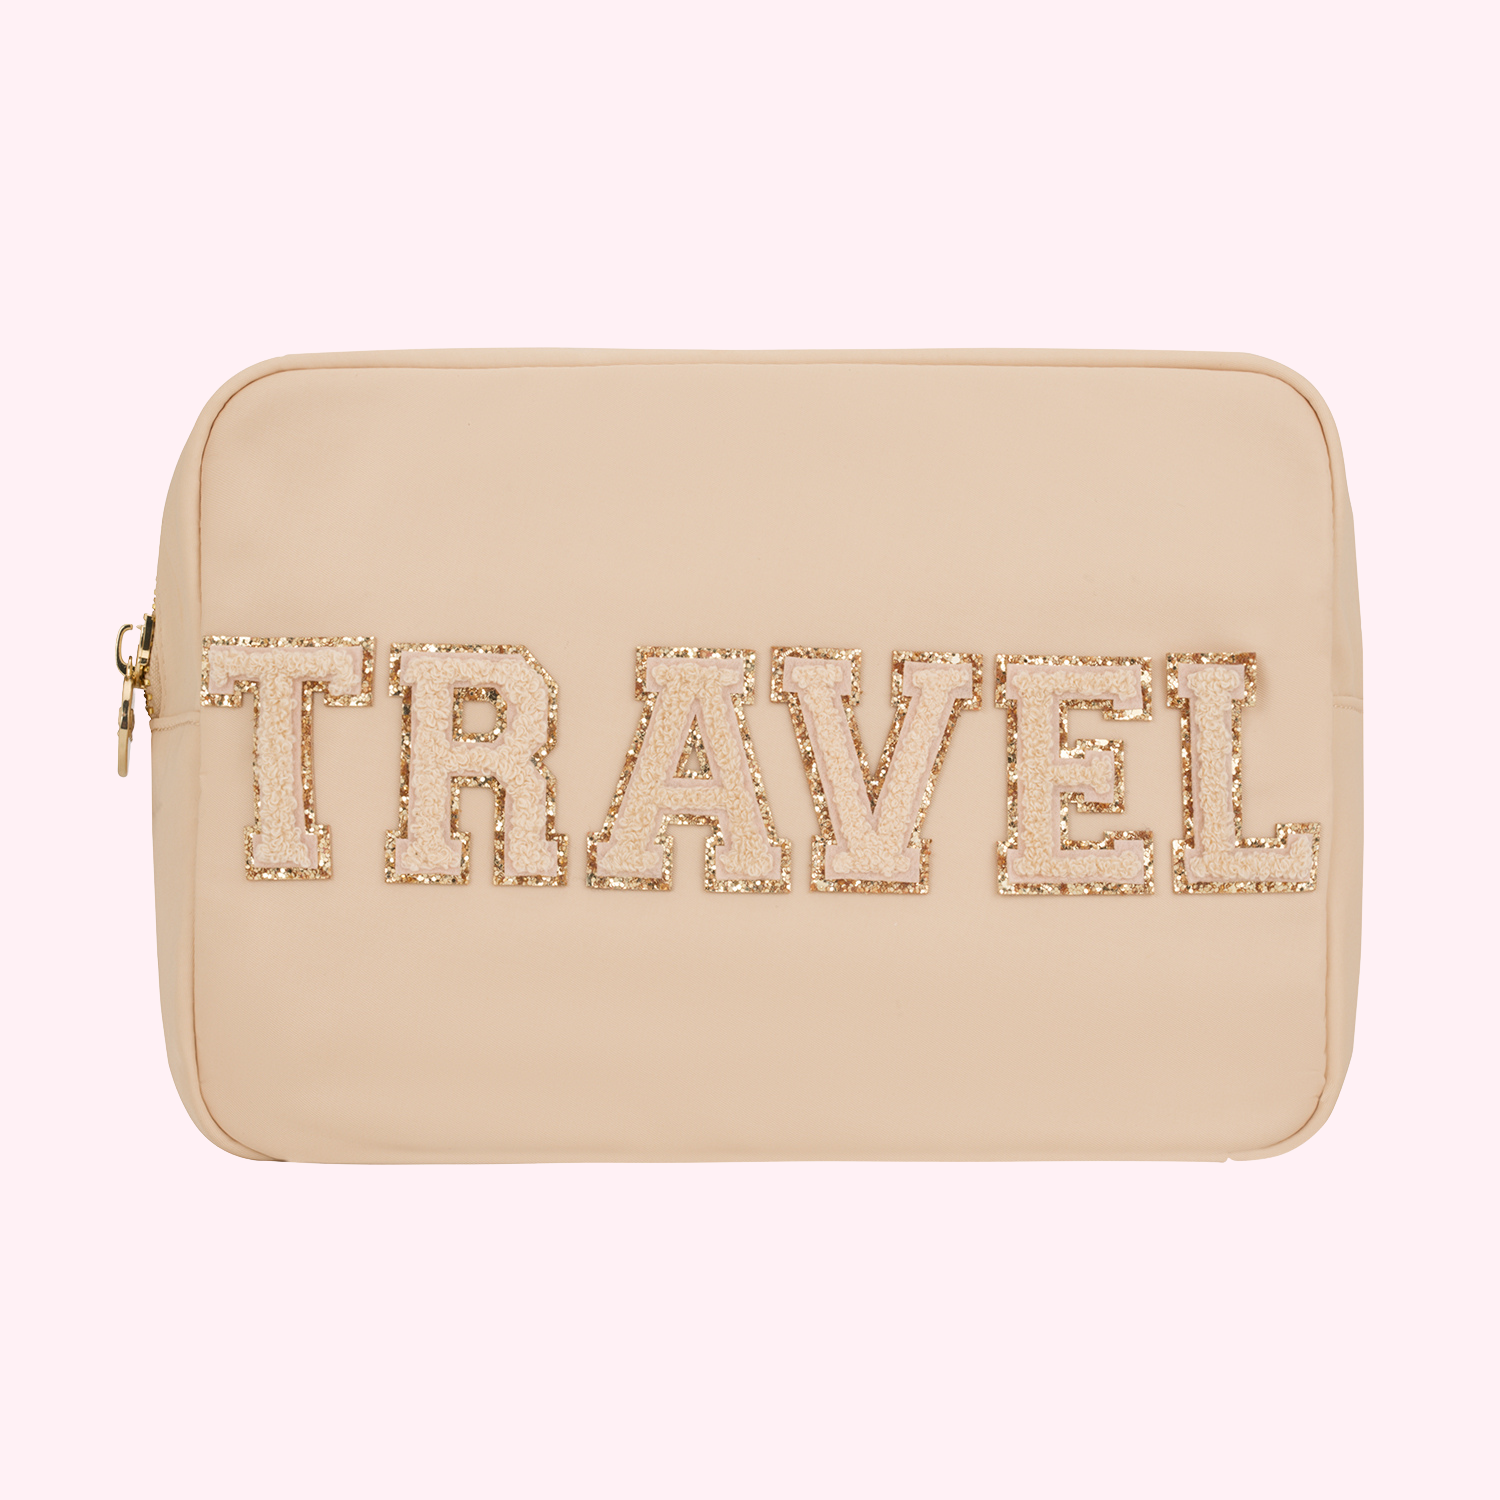 STONEY CLOVER TRAVEL SAND LARGE POUCH